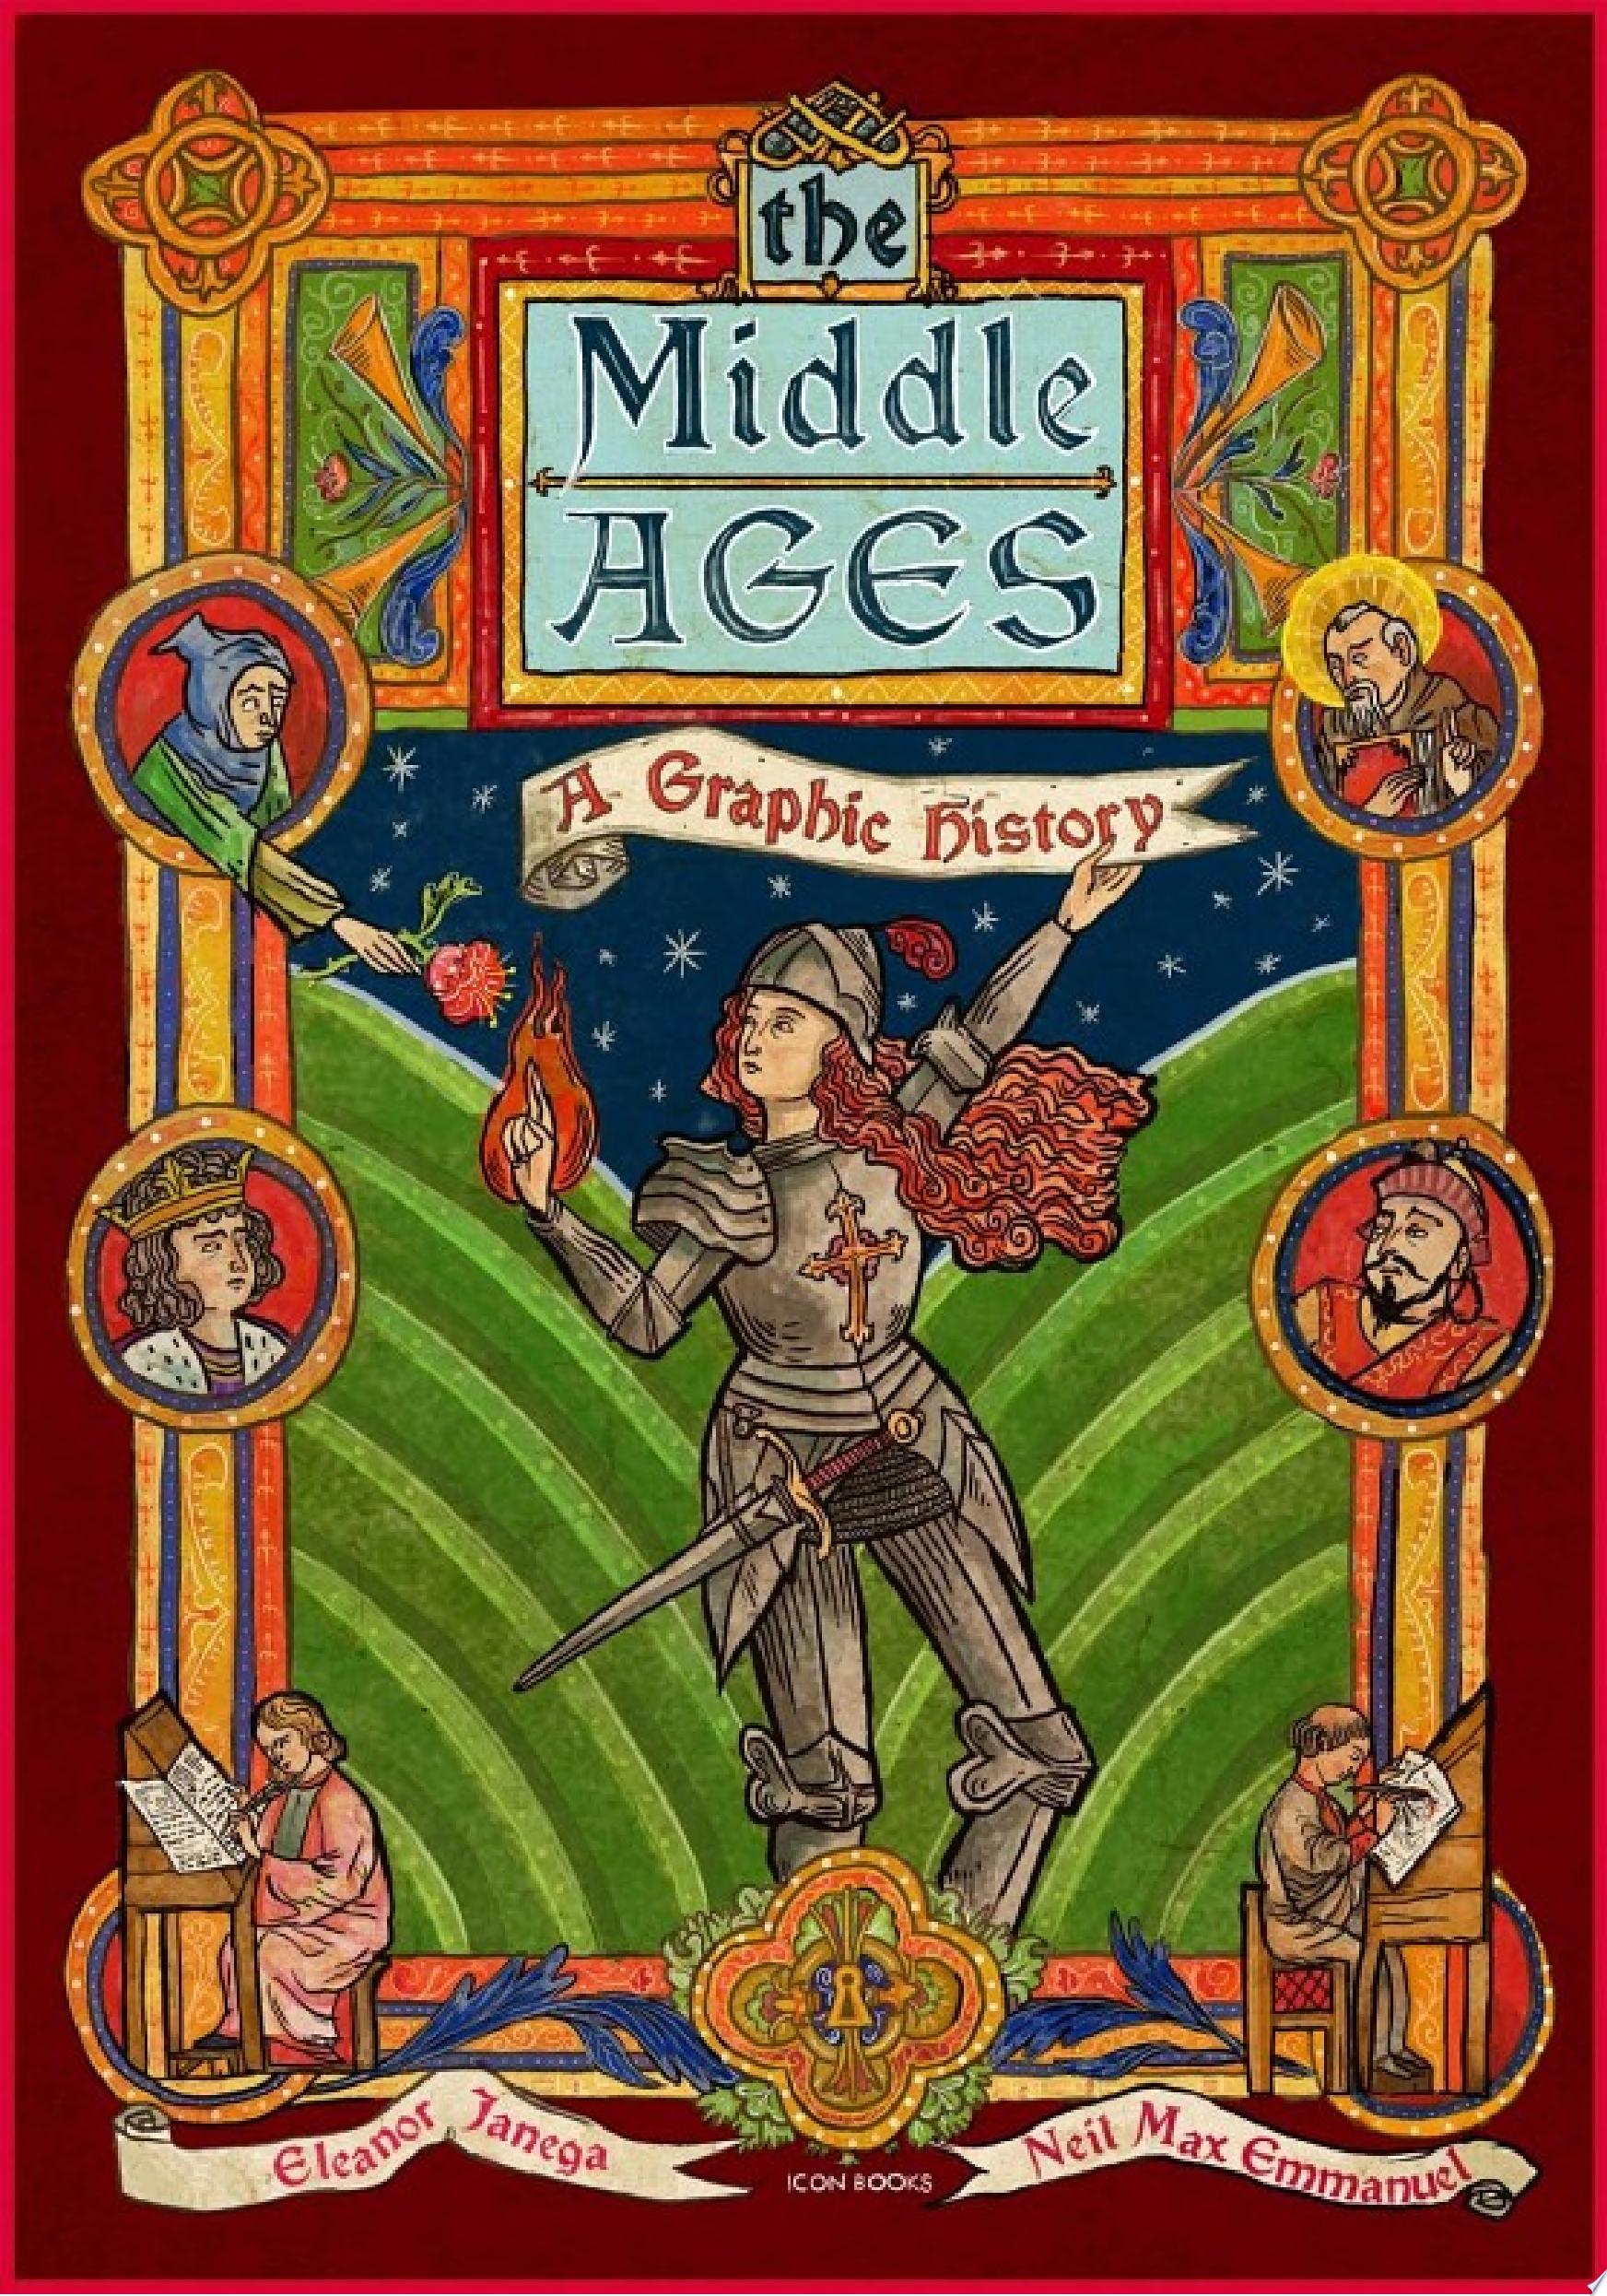 Image for "The Middle Ages"